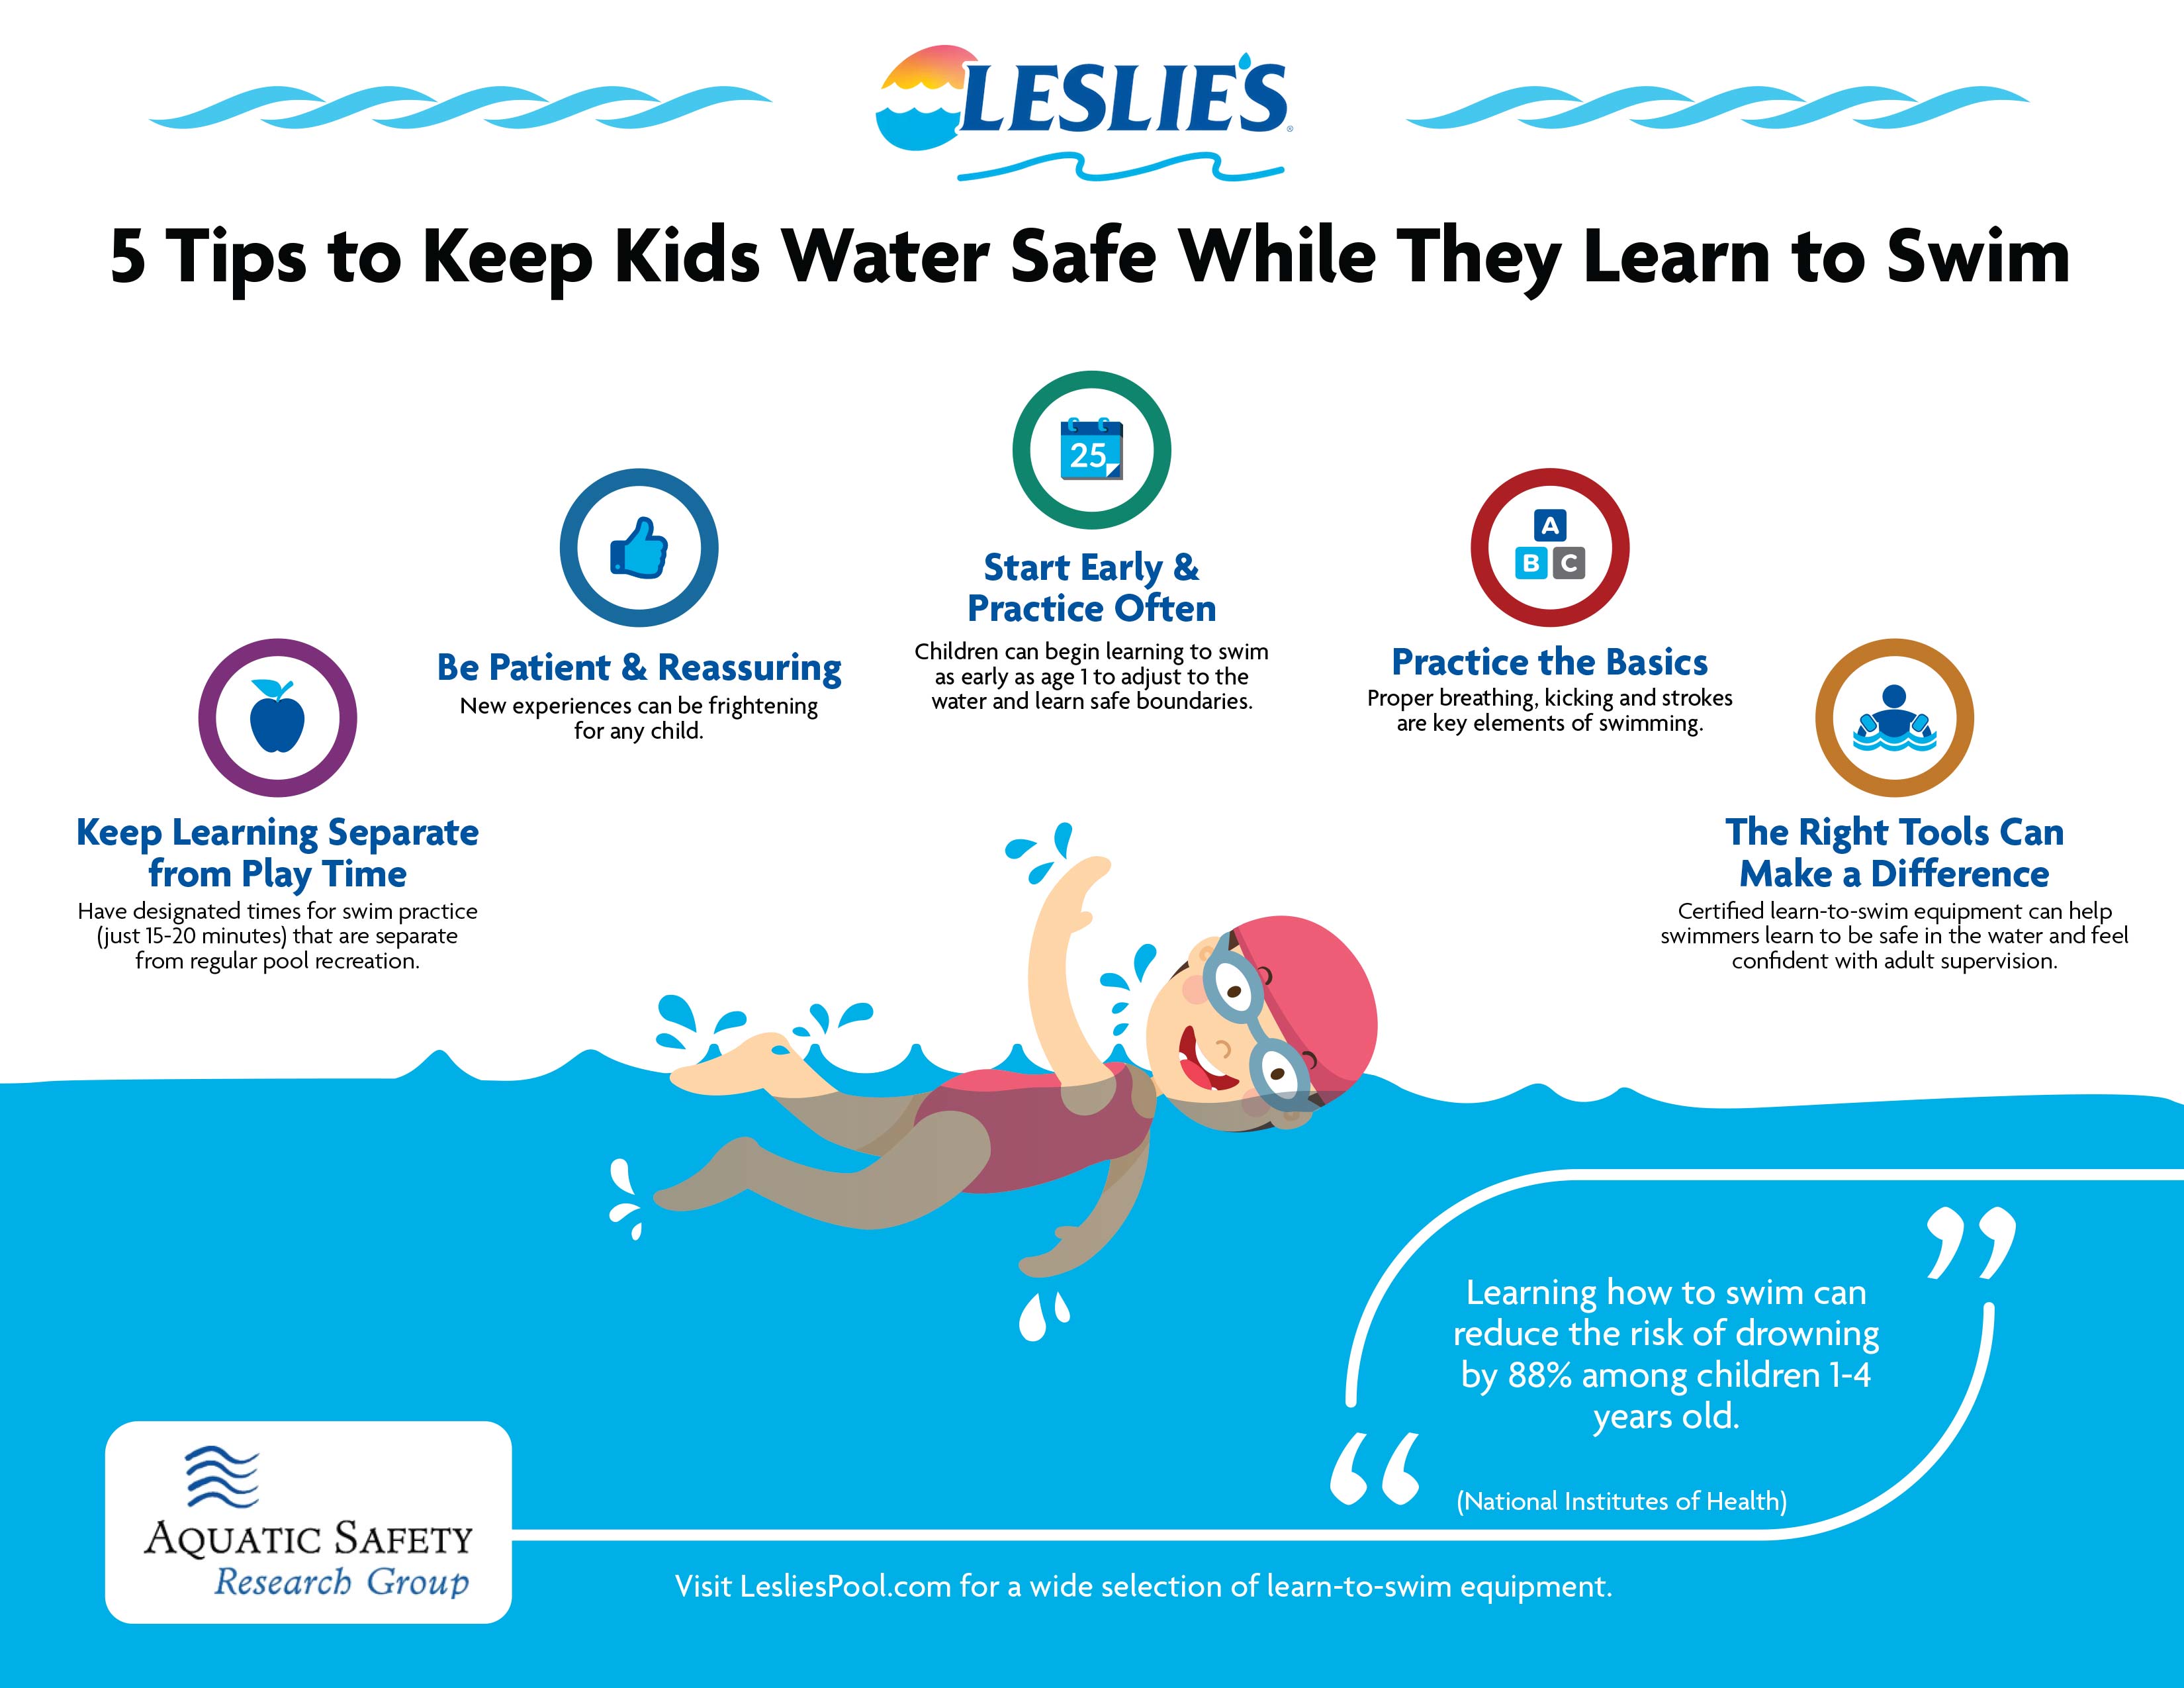 5 Tips to Keep Kids Water Safe While They Learn to Swim